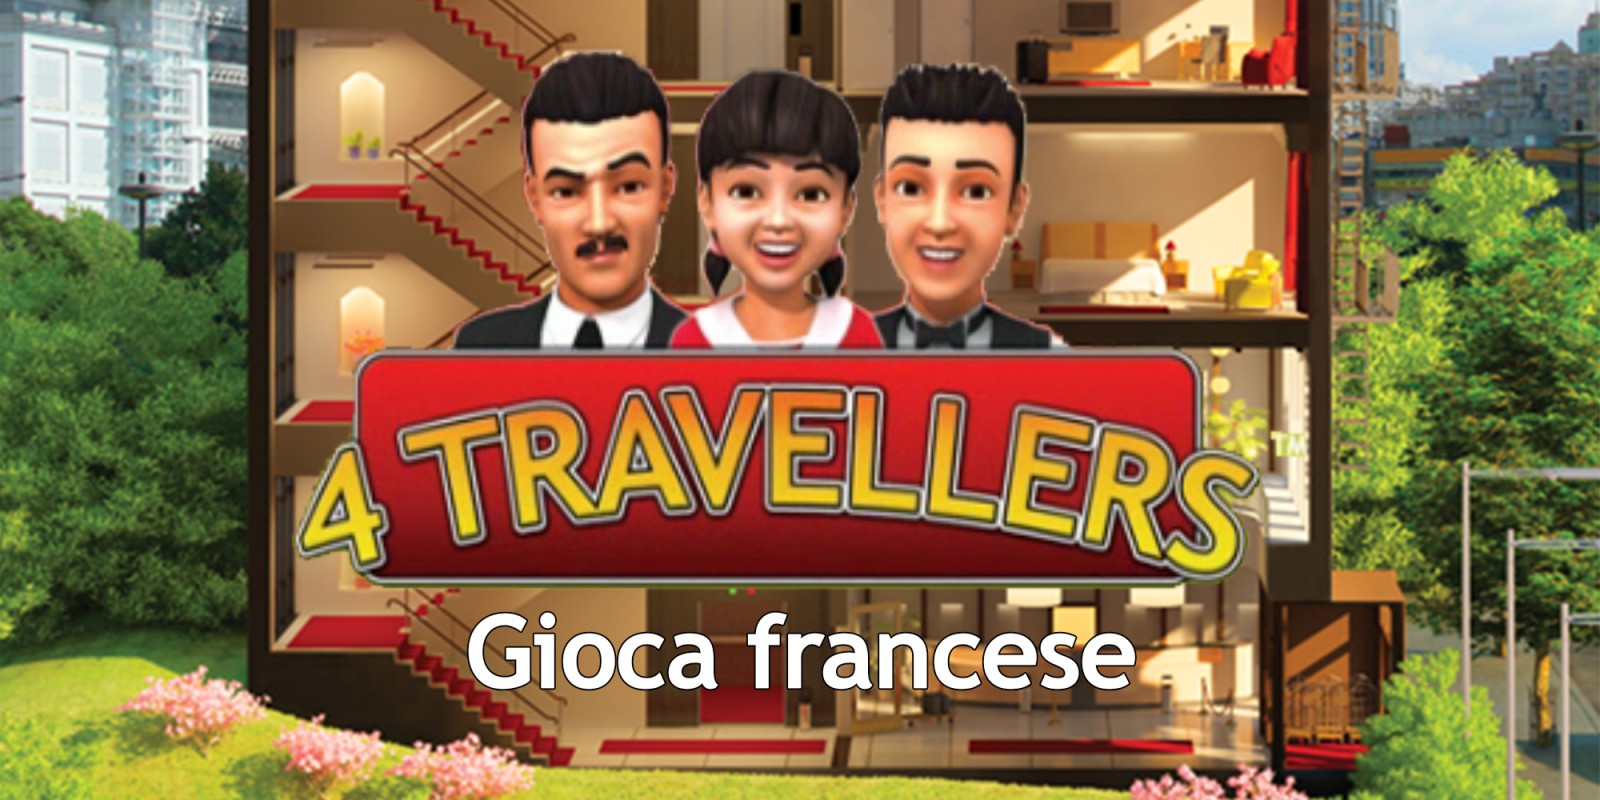 4 travellers